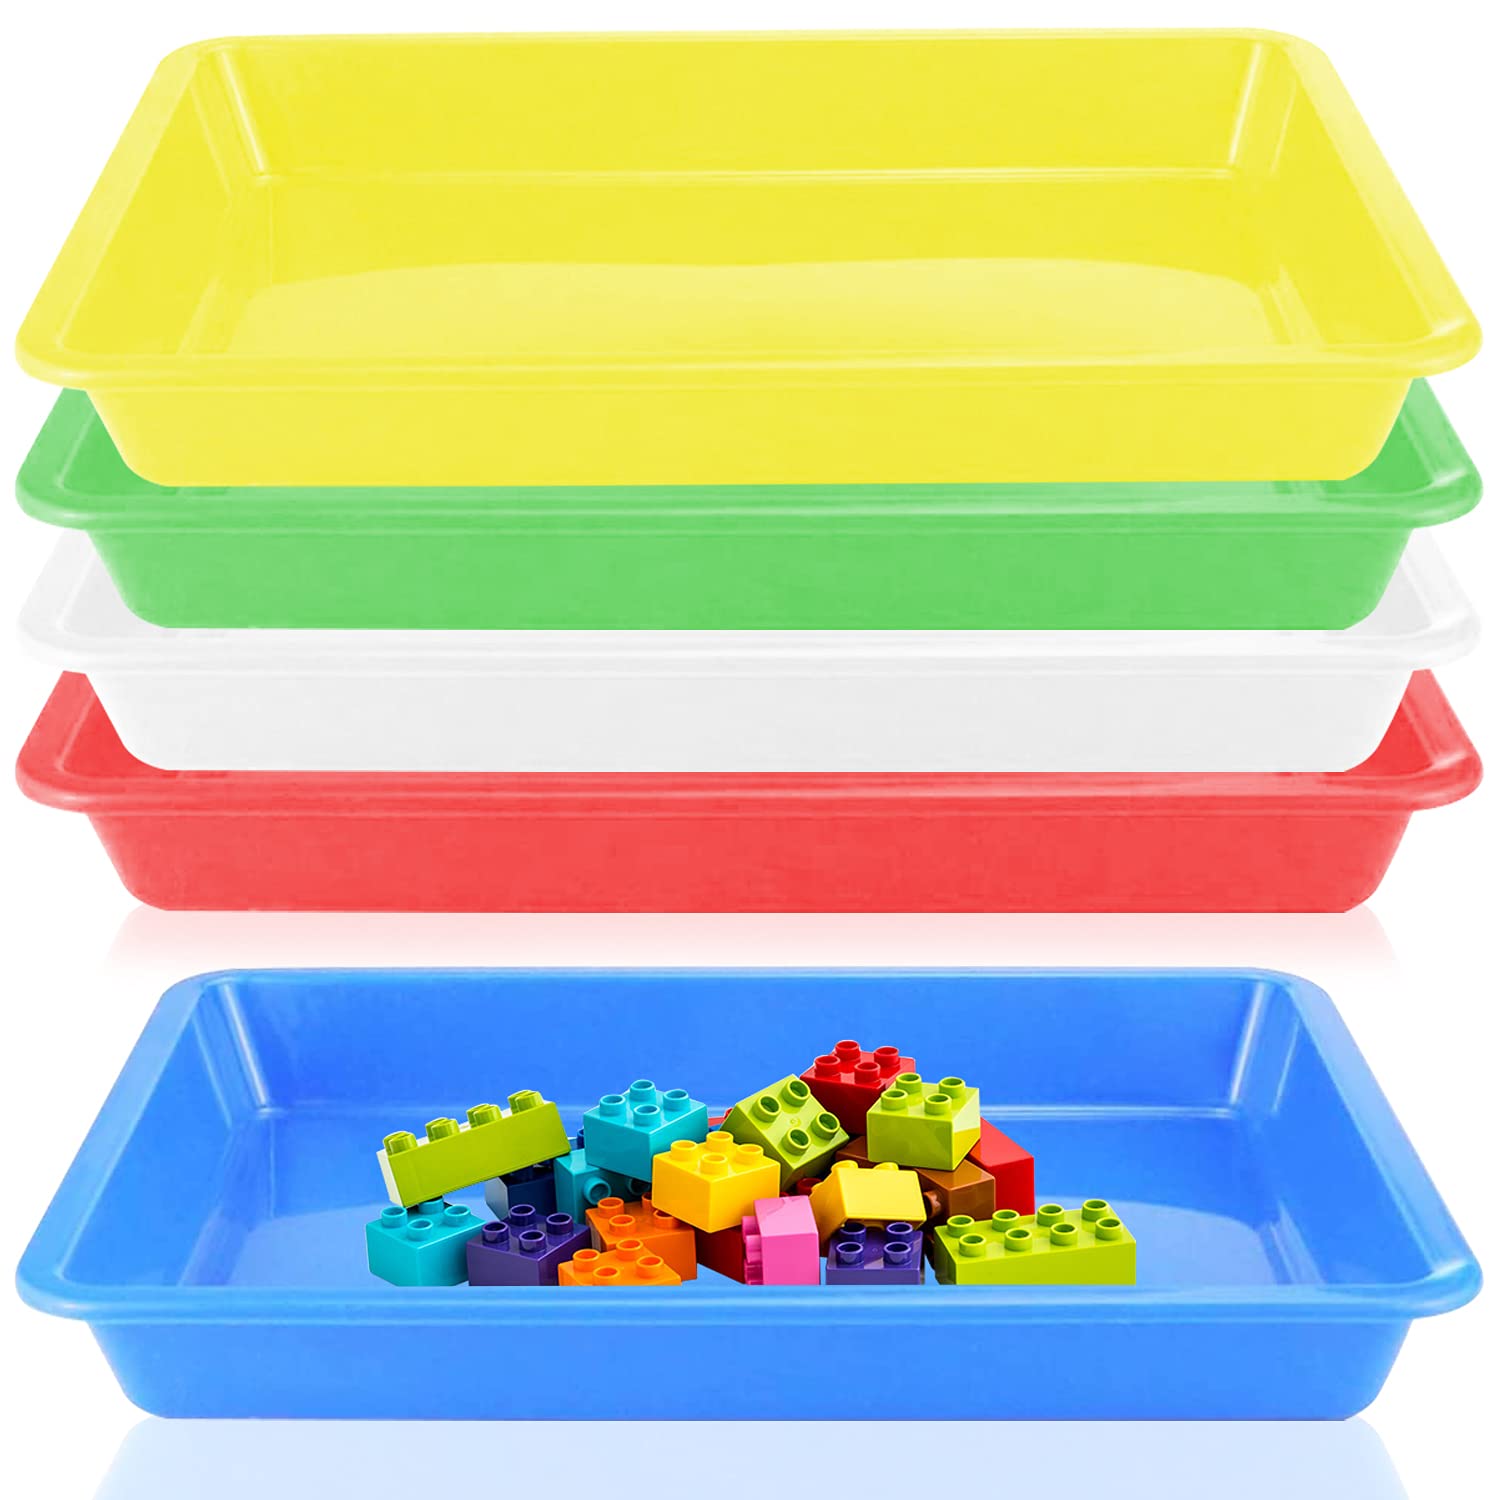 Cool Craft Trays - Craft Supplies - 6 Pieces 